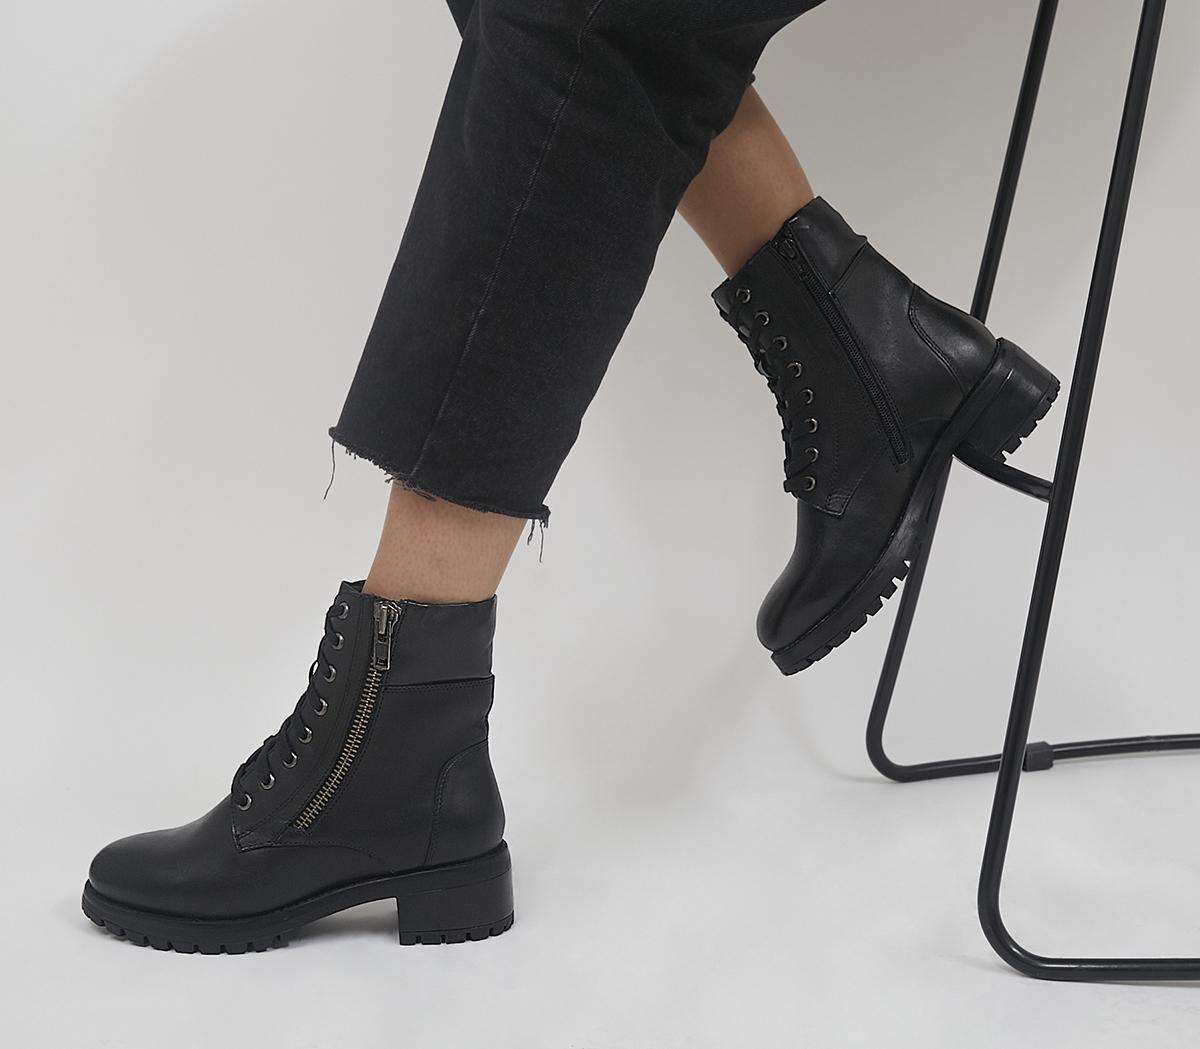 OFFICEAppealing Heeled Side Zip Lace Up BootsBlack Leather